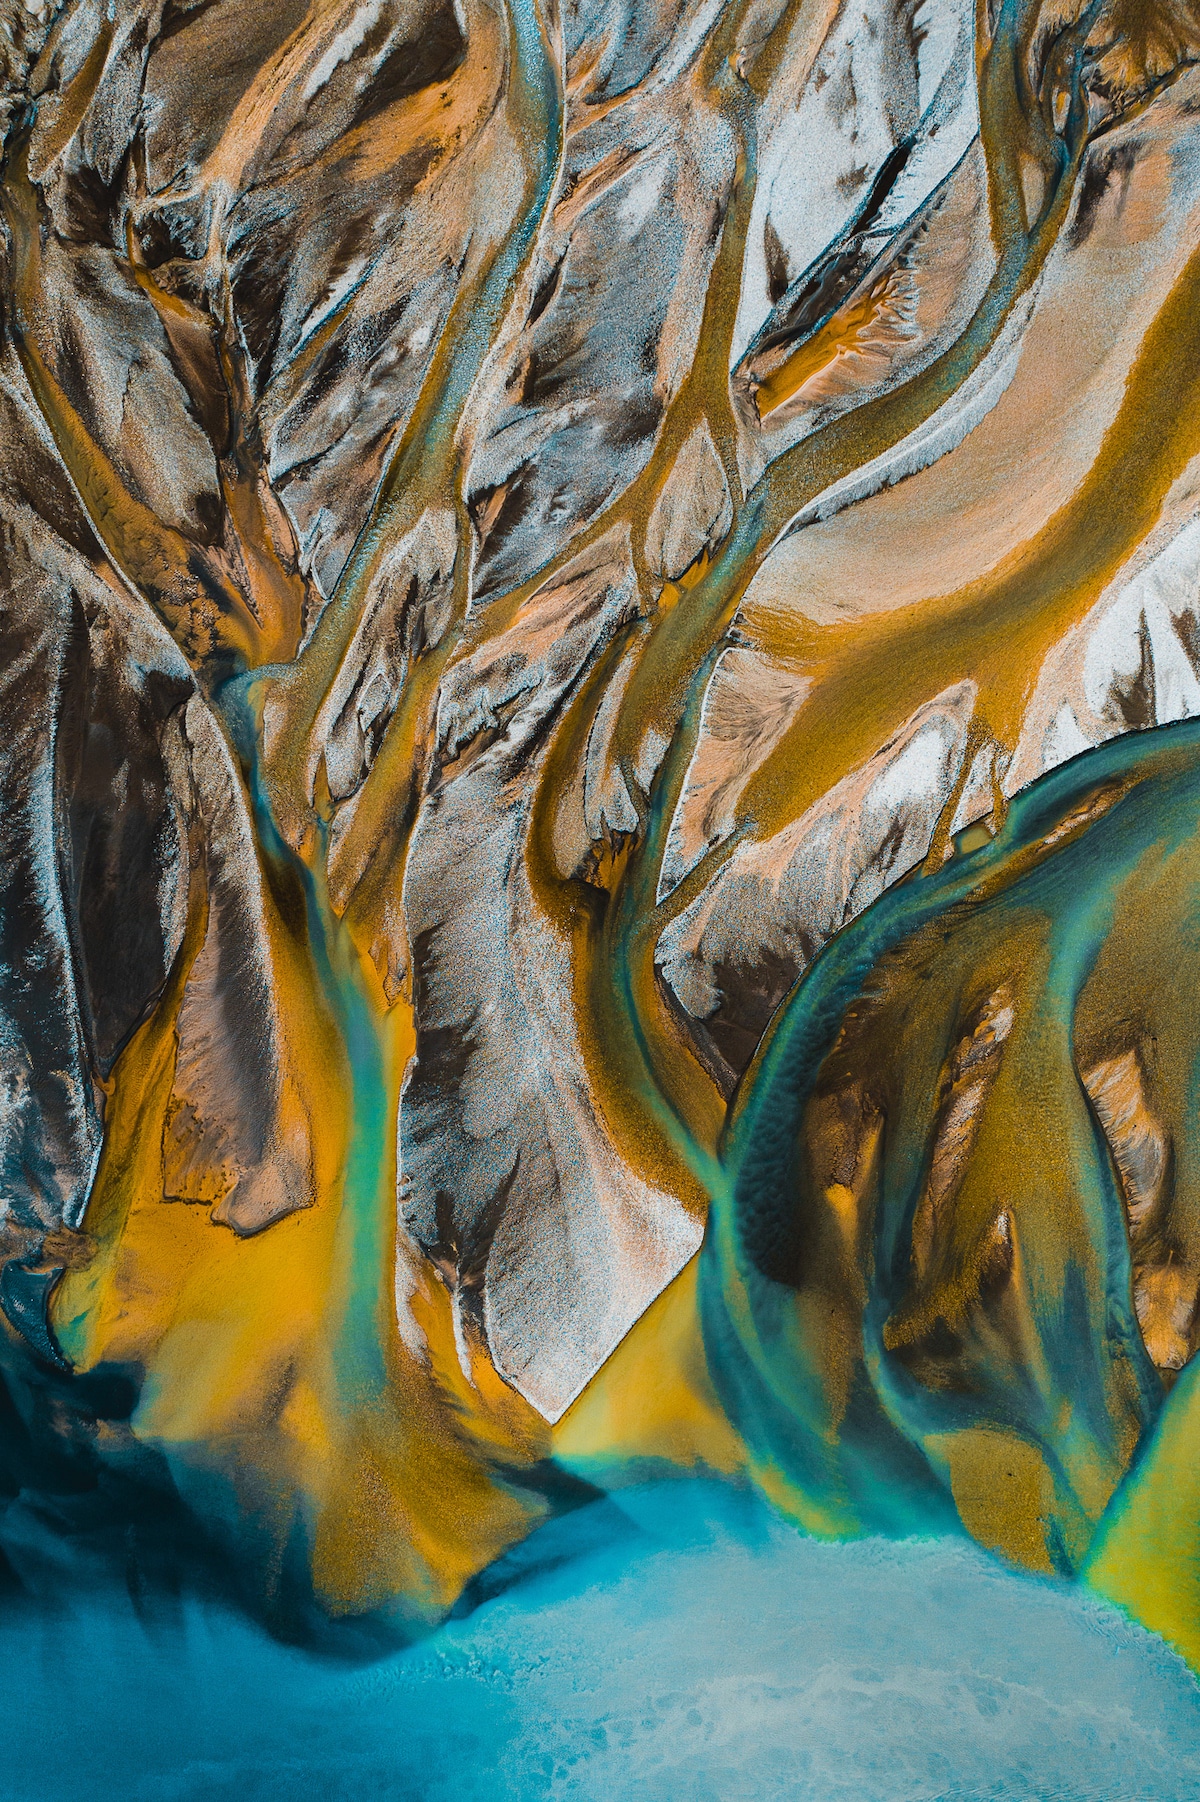 Abstract Photo of Iceland's Rivers